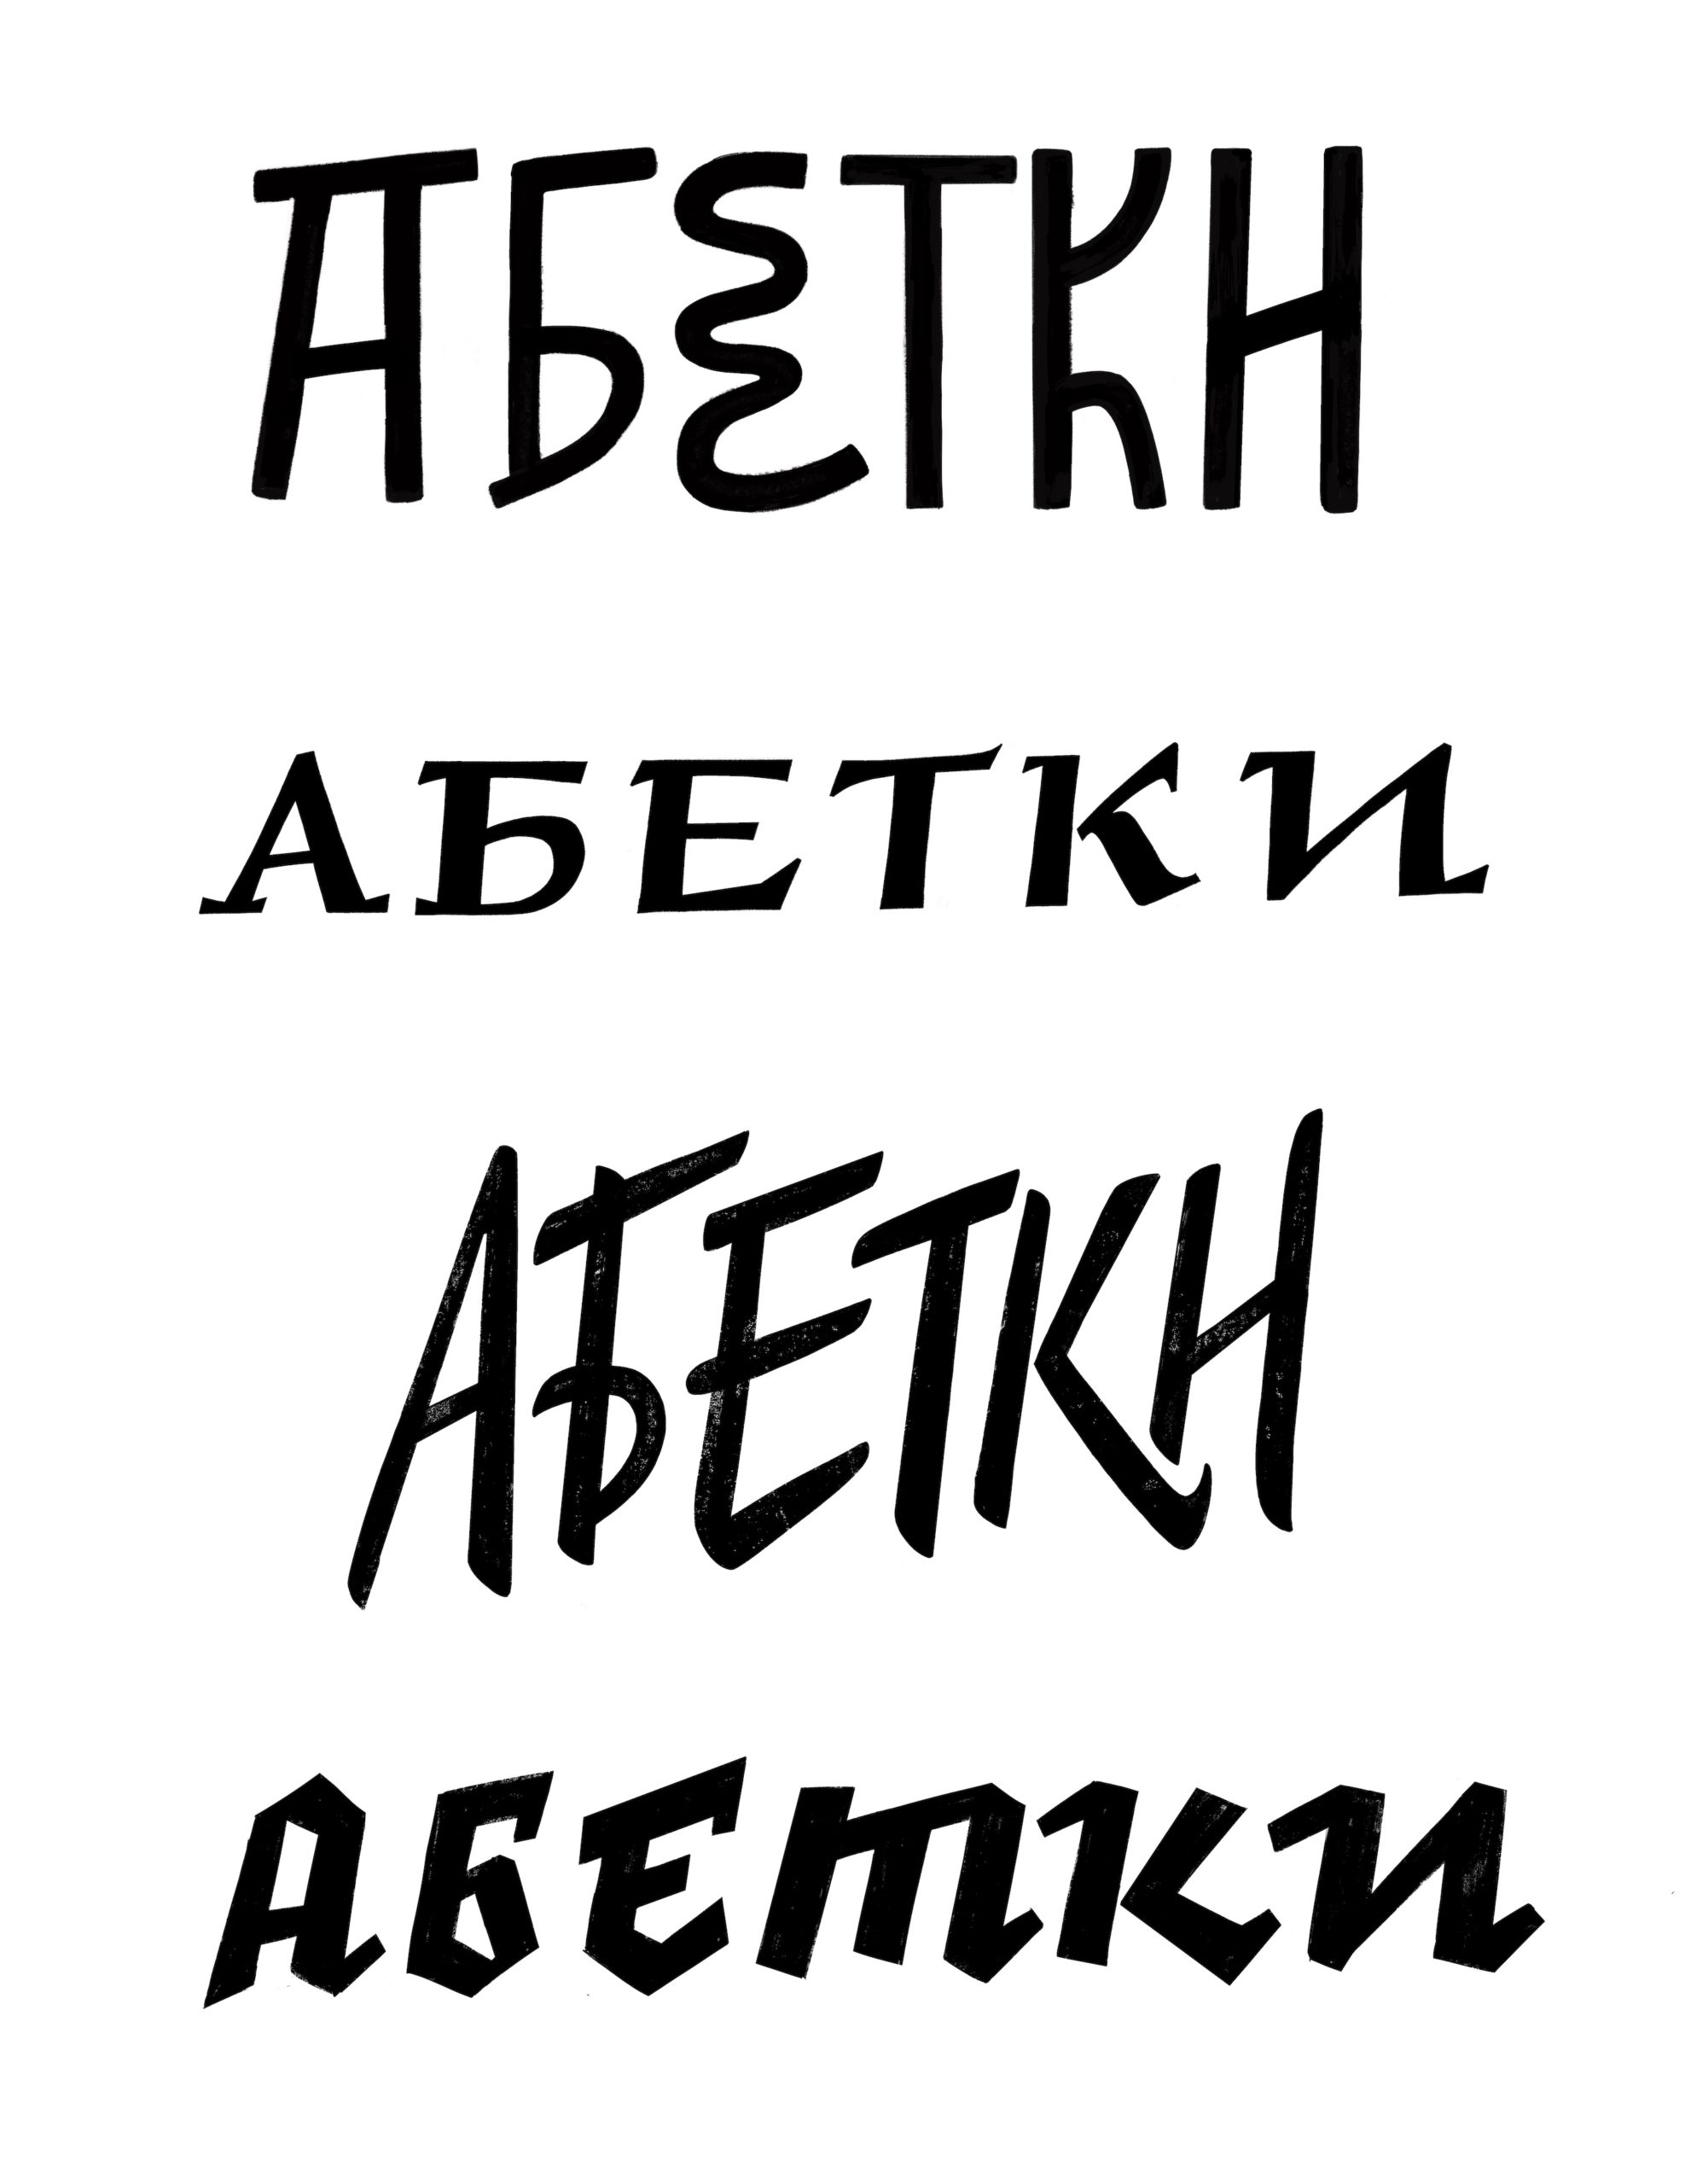 different examples of lettering